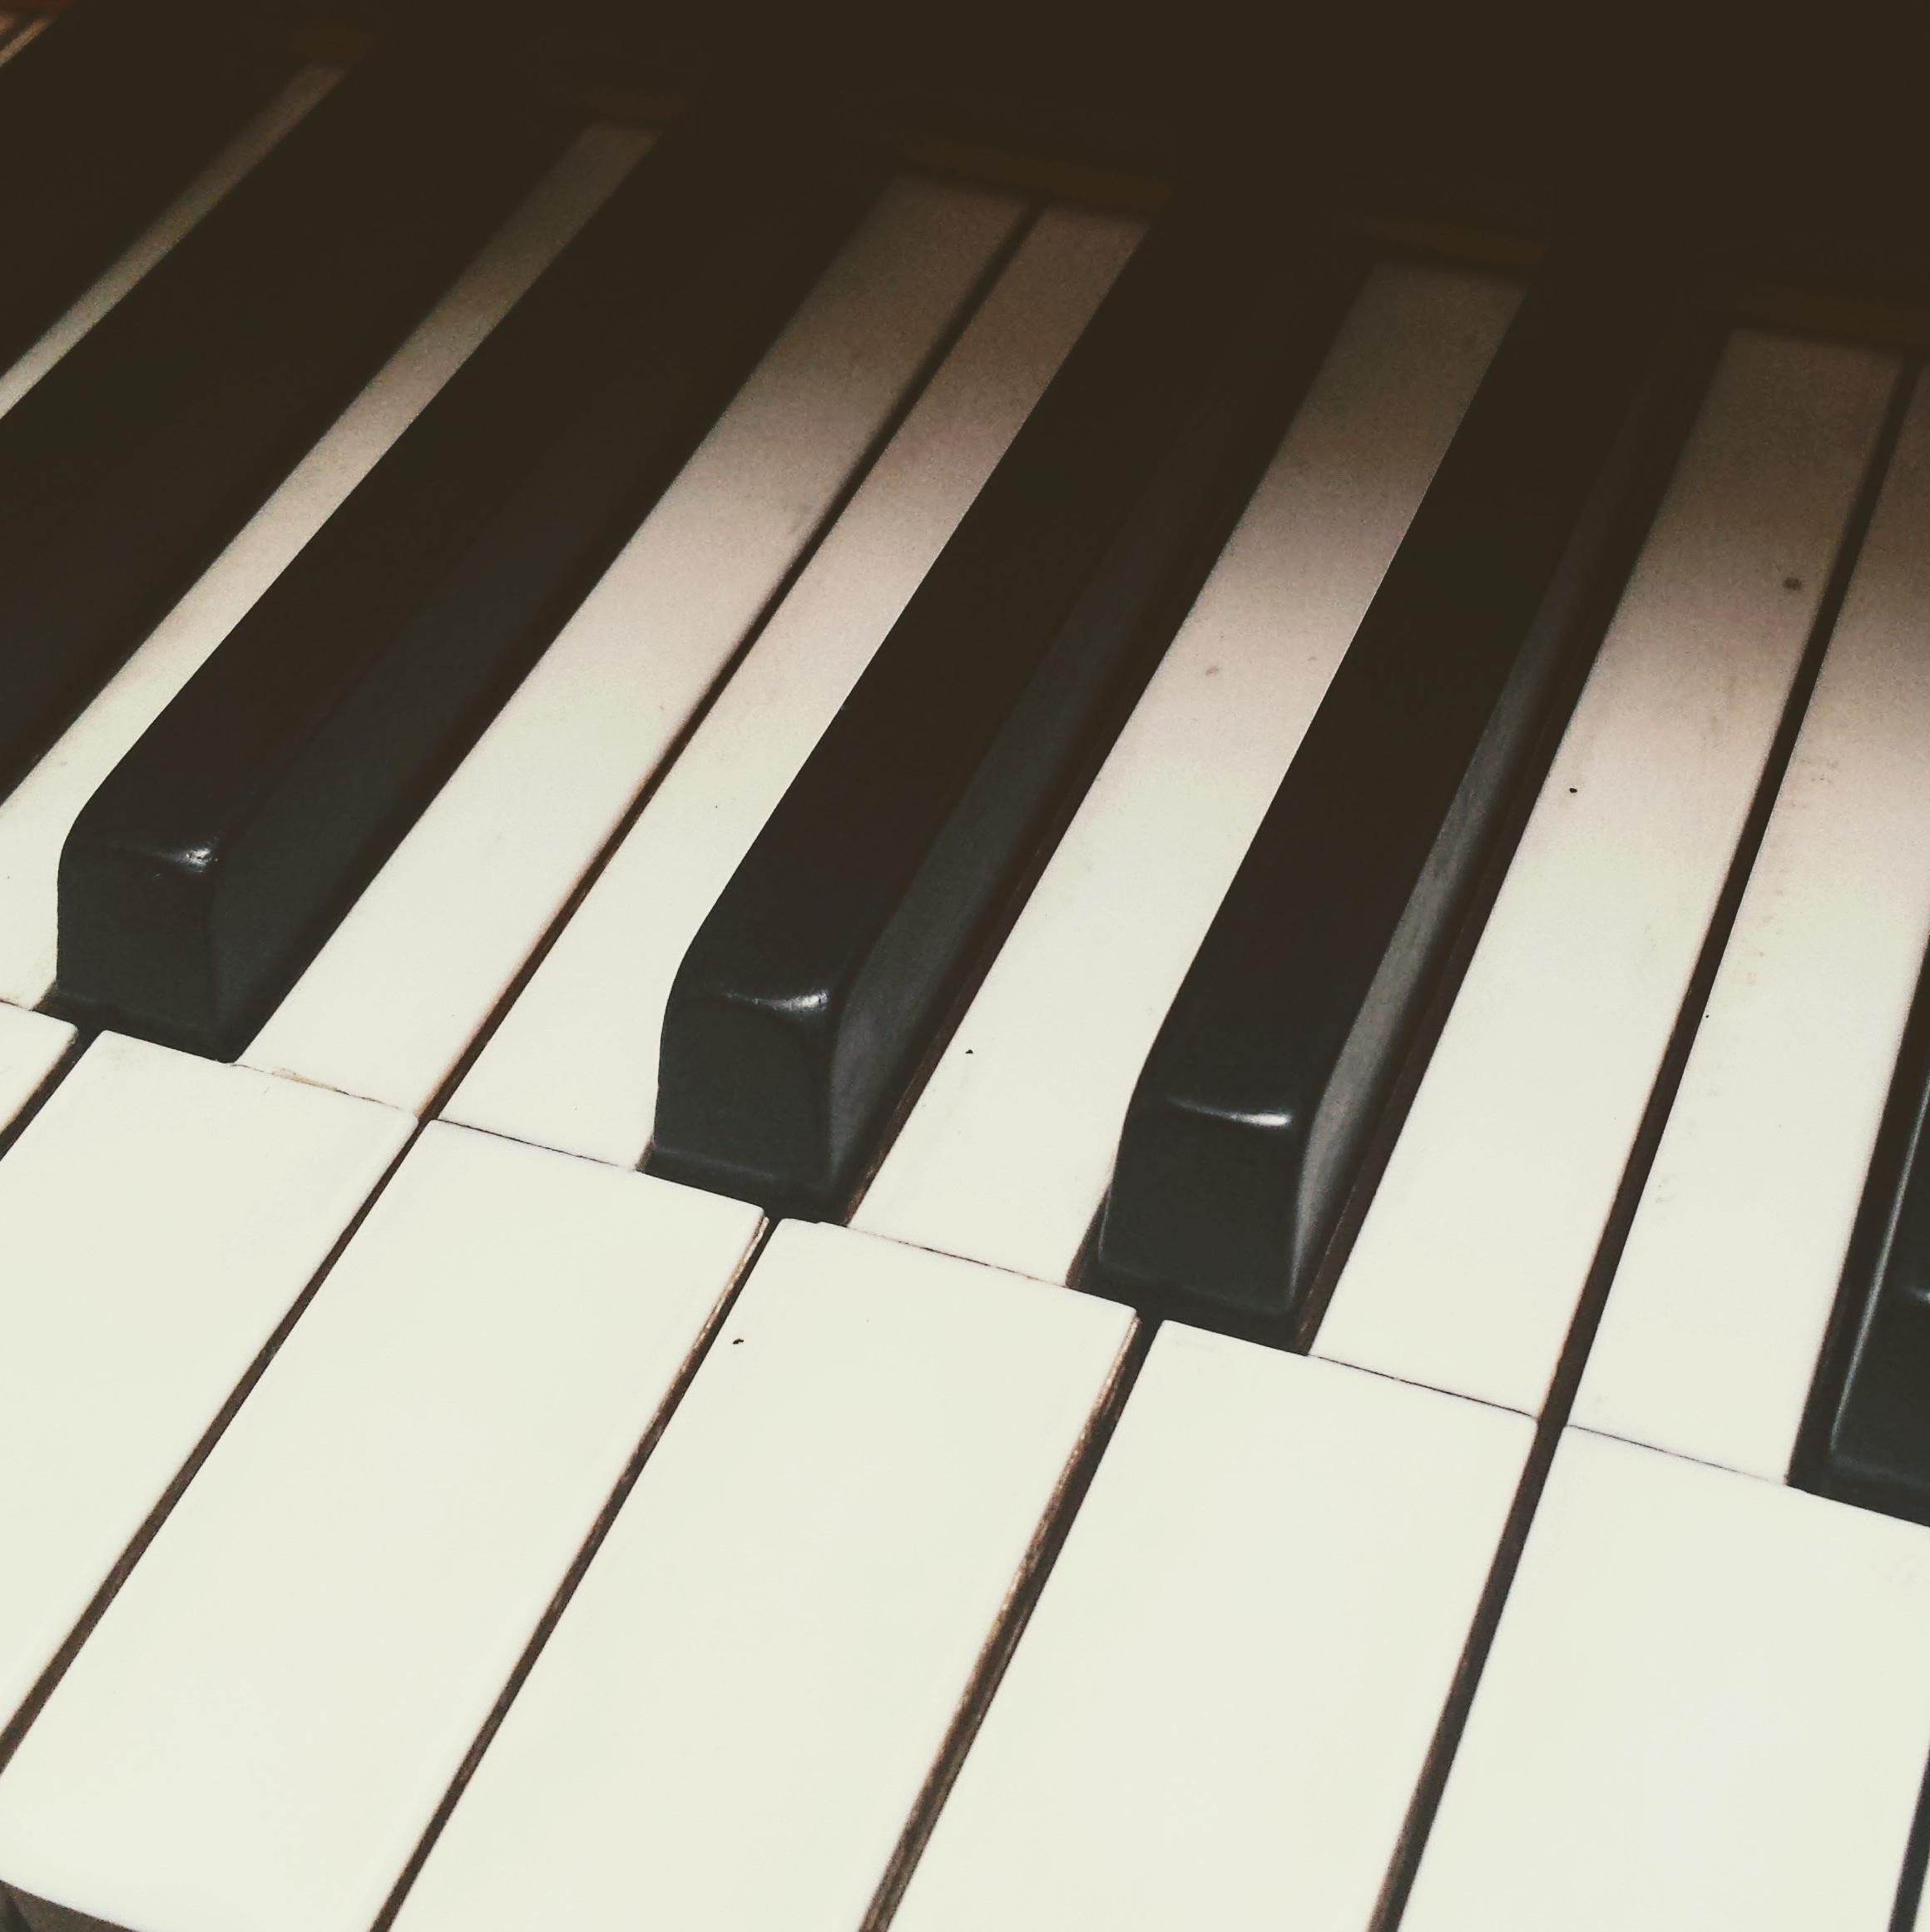 Piano for Two - a Couples' Romantic Piano Mix for an Intimate Ambience